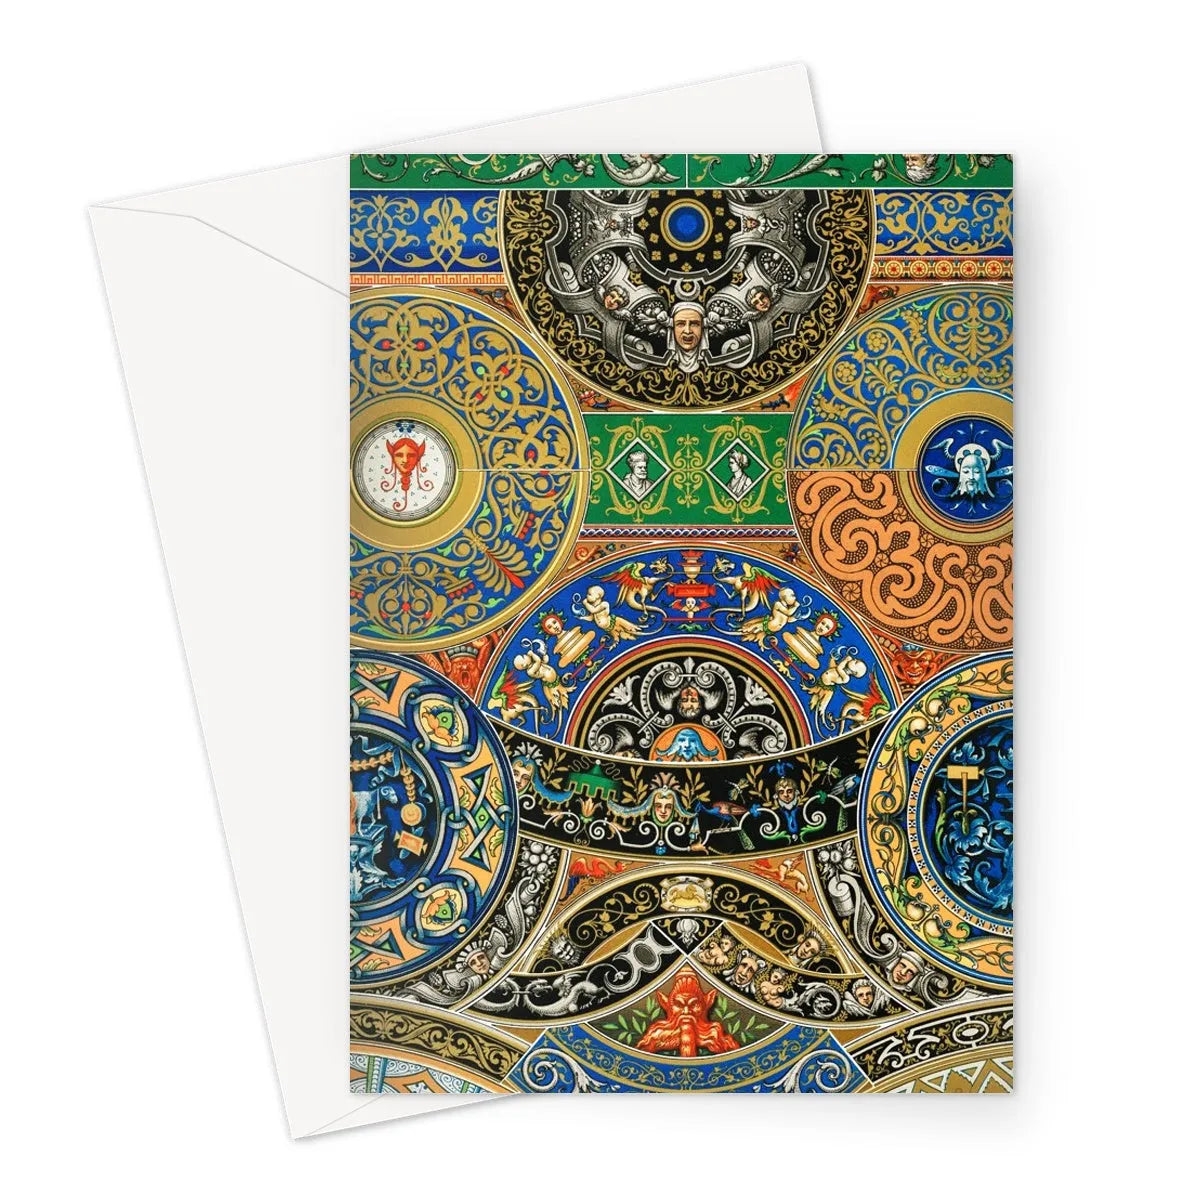 Renaissance Pattern 2 By Auguste Racinet Greeting Card - A5 Portrait / 1 Card - Greeting & Note Cards - Aesthetic Art